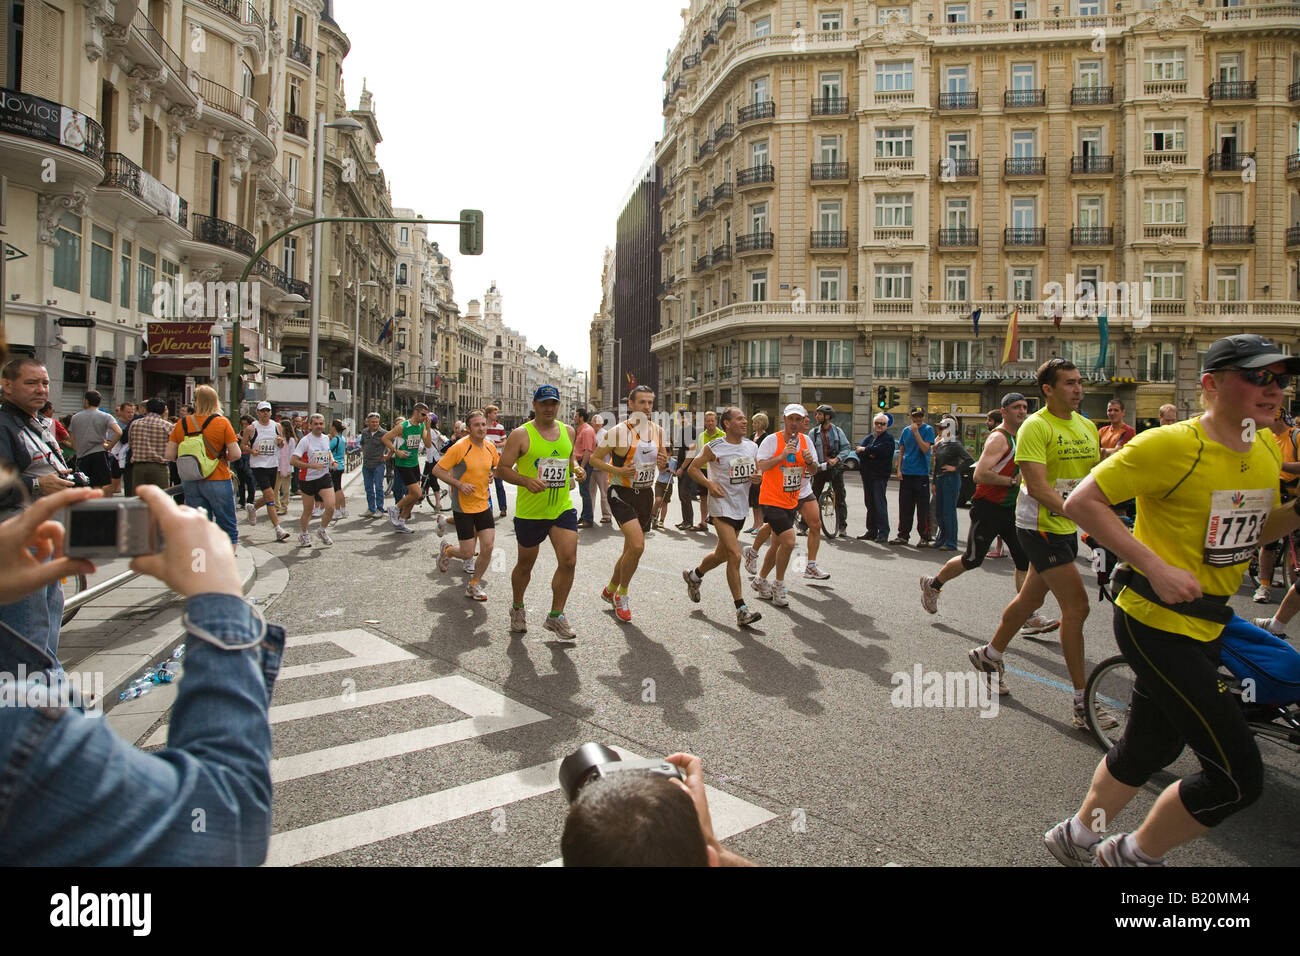 SPAIN Madrid Photographers stand and sit in street to photograph runners in marathon race on Gran Via Street Stock Photo